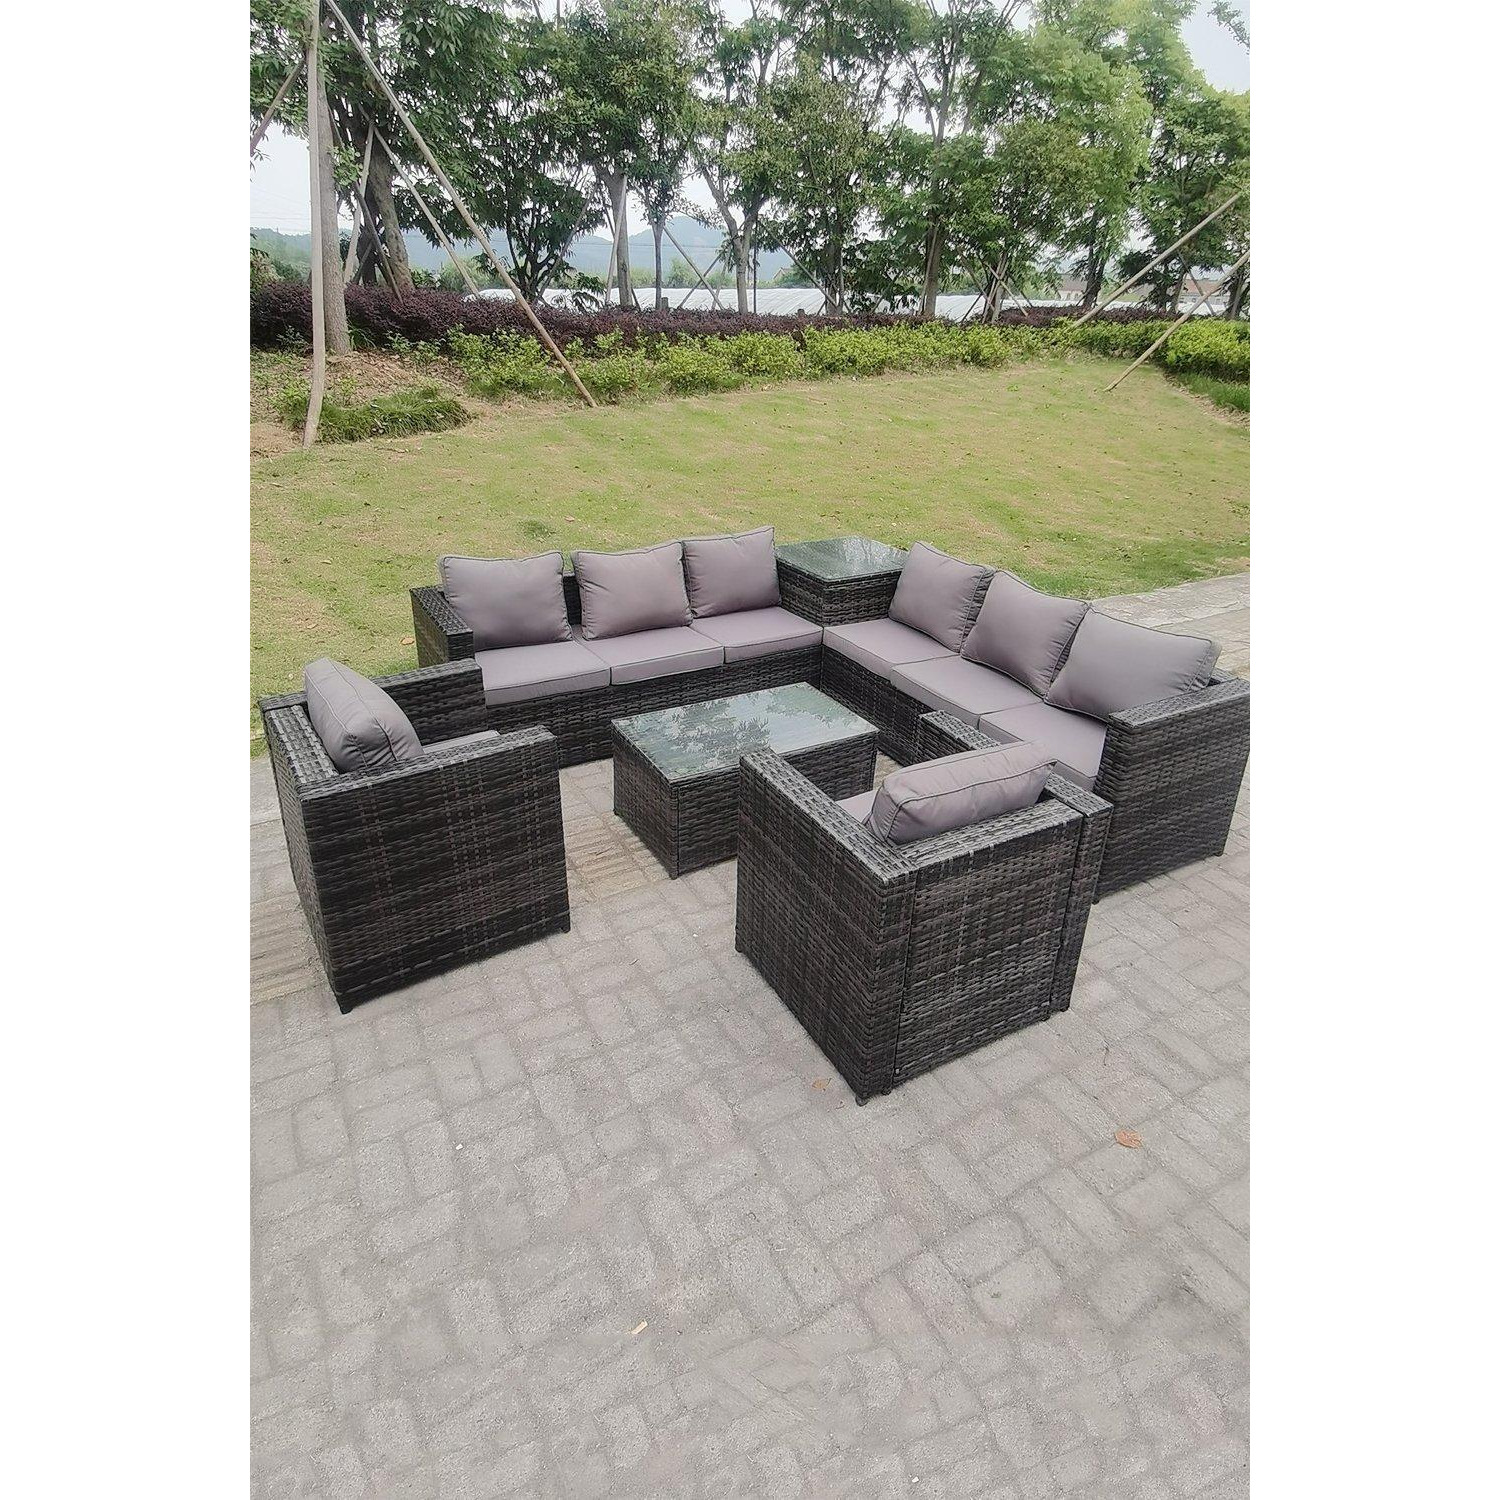 8 Seater PE Wicker Outdoor Rattan Garden Furniture Sets Lounge Chair 2 Coffee Table - image 1